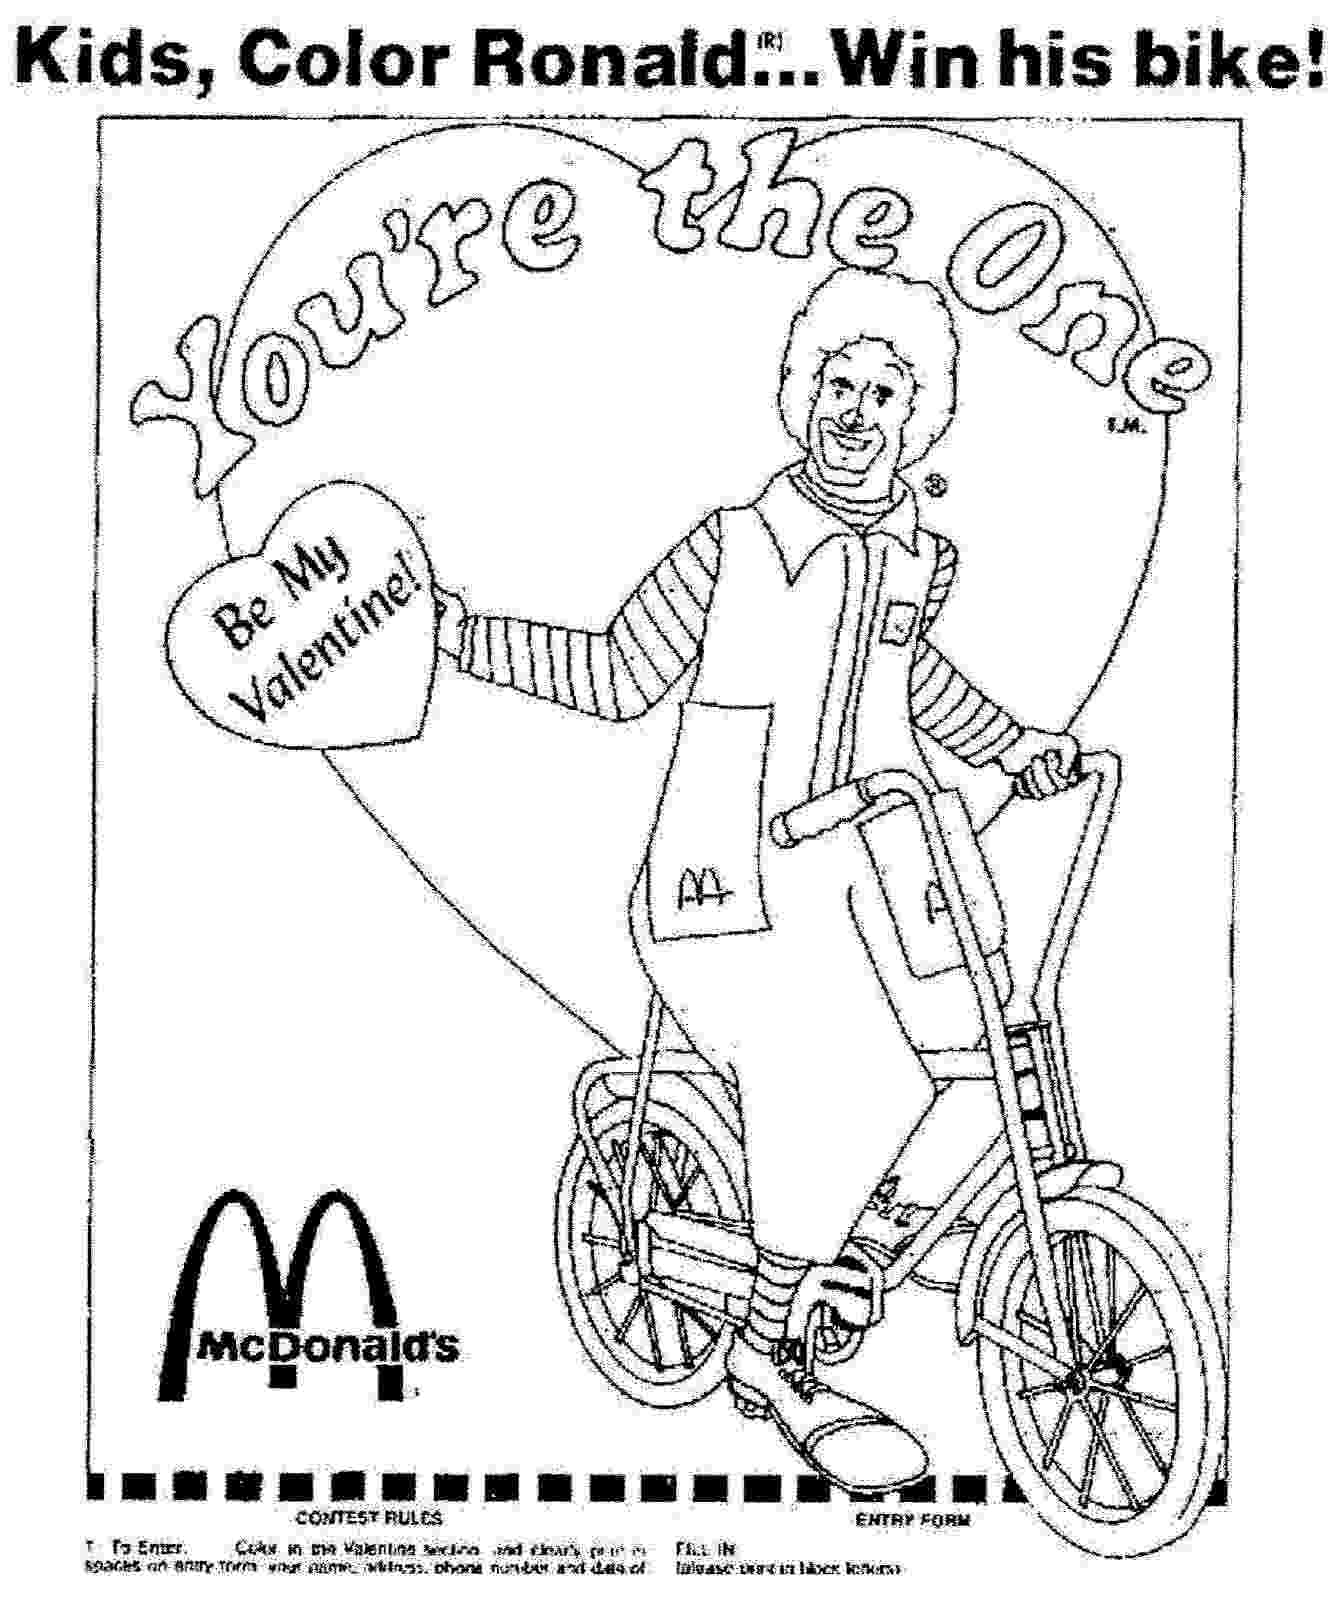 ronald mcdonald colouring pictures ronald mcdonald coloring page free printable coloring pages colouring pictures ronald mcdonald 